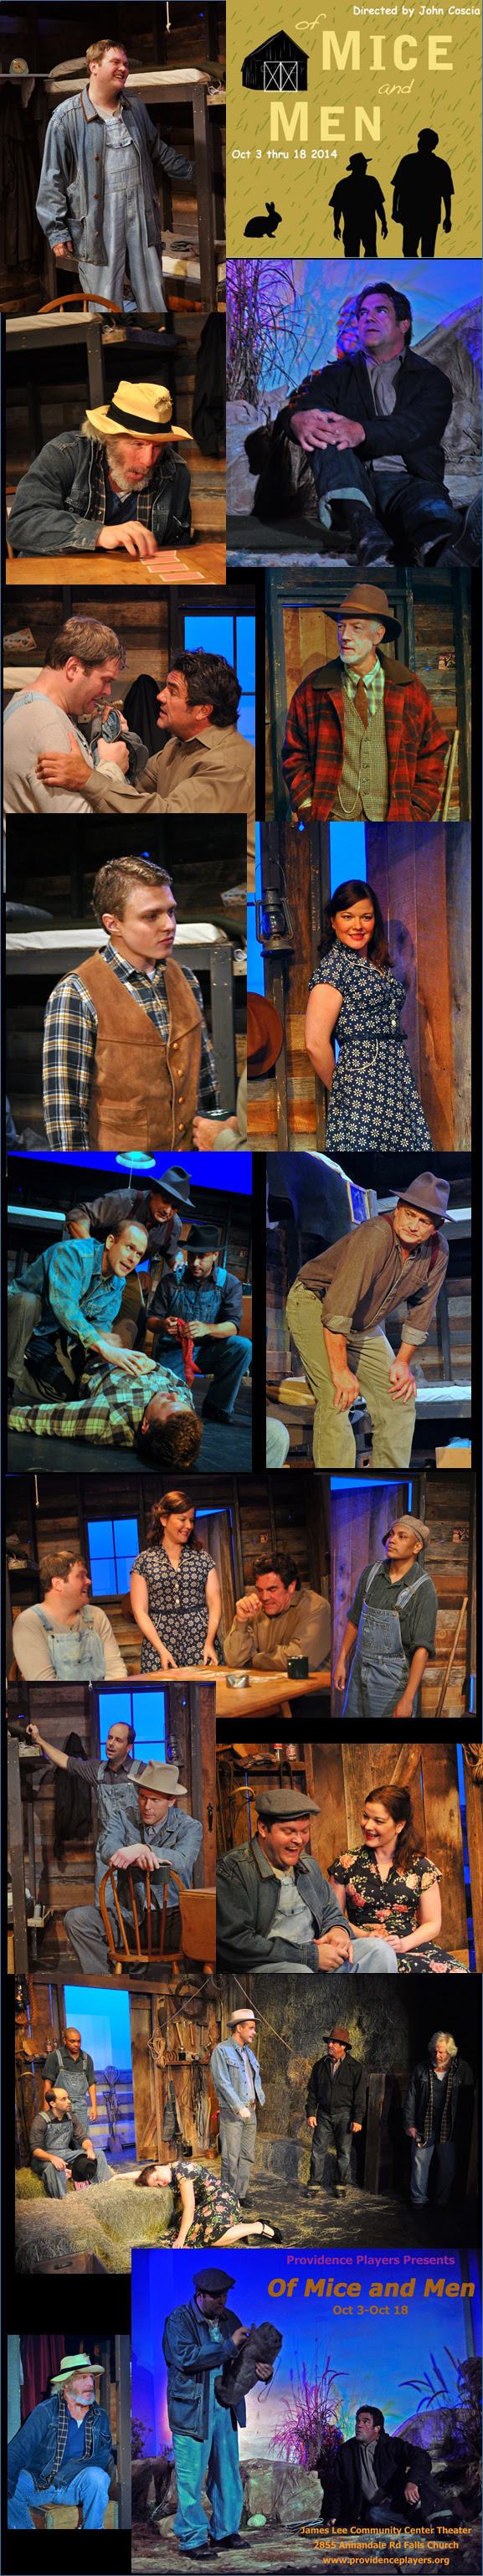 PPF Of Mice and Men Montage Photos by Chip Gertzog